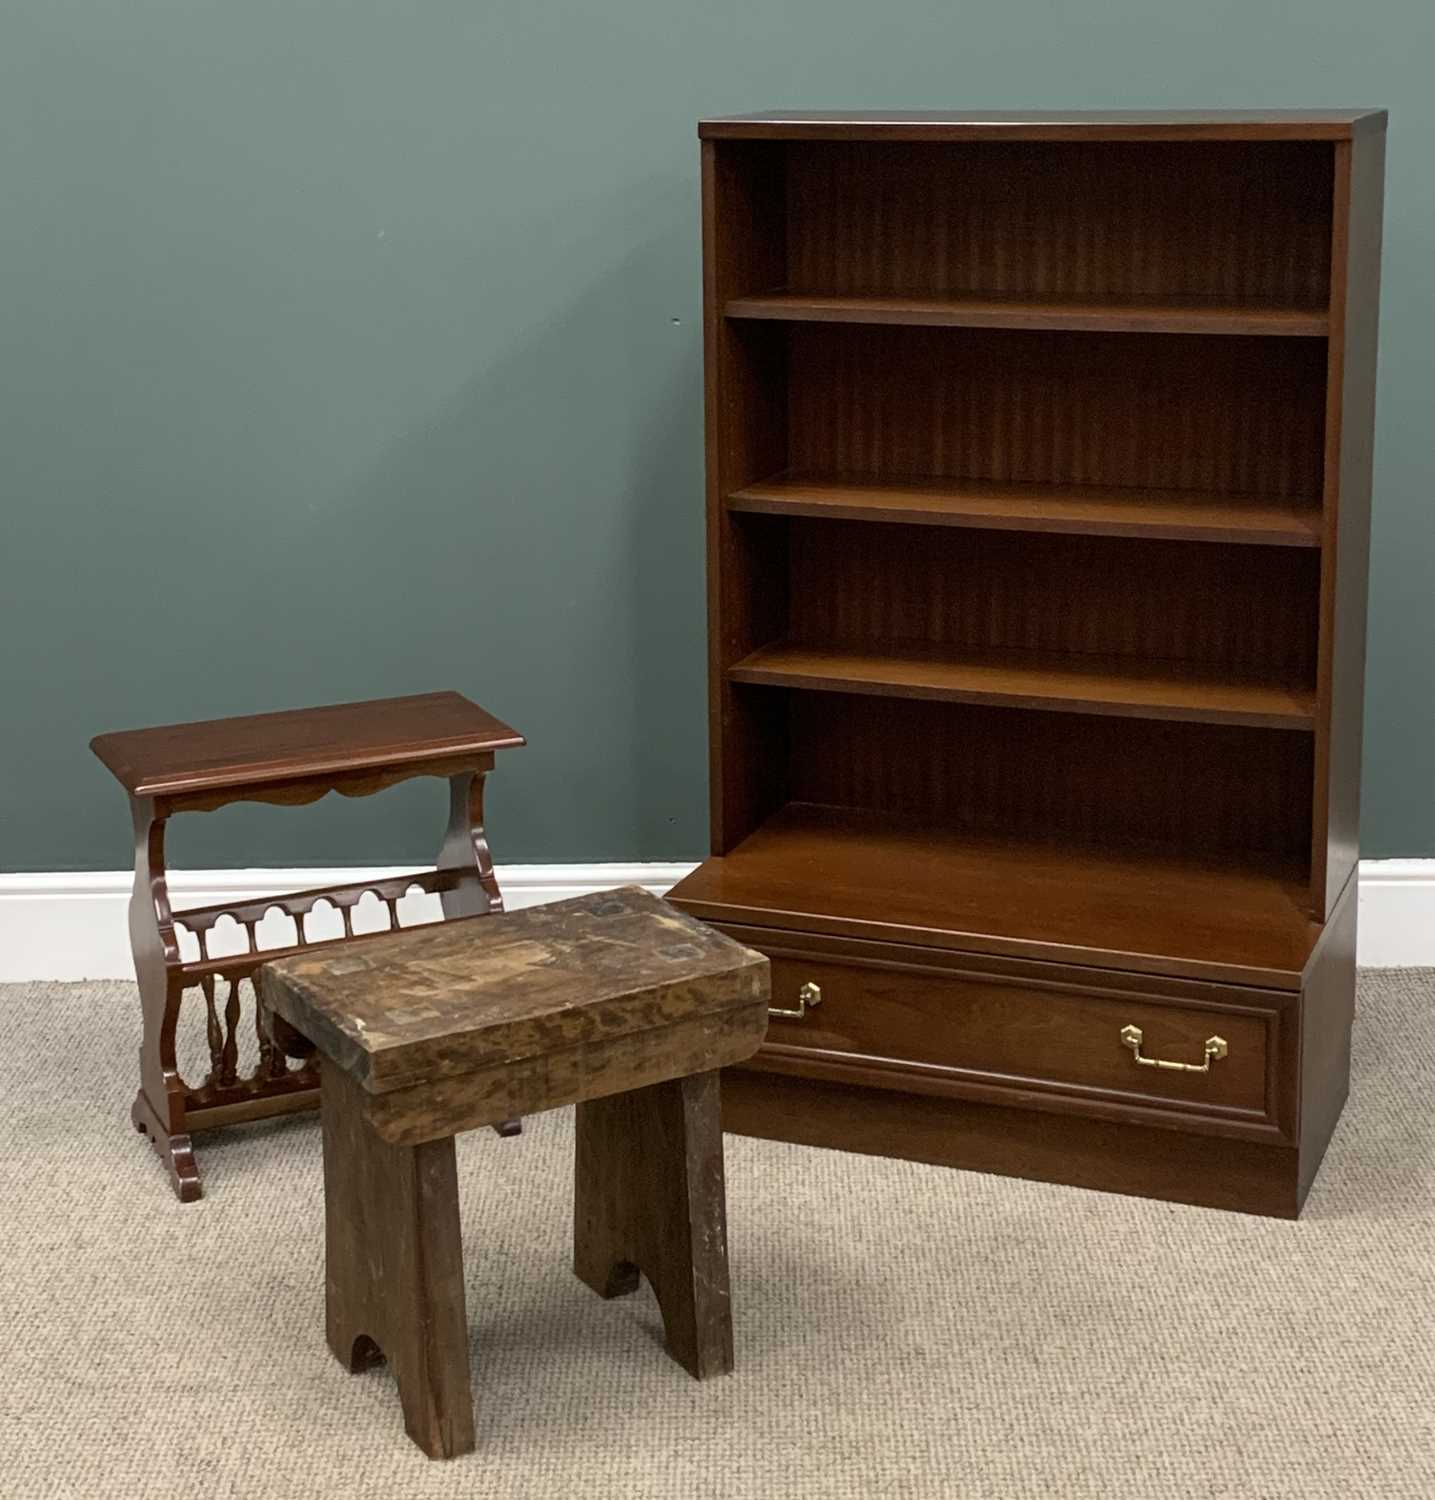 G-PLAN REPRODUCTION MAHOGANY BOOKCASE with base drawer, 130 (h) x 82 (w) x 46 (d) cms, TABLETOP